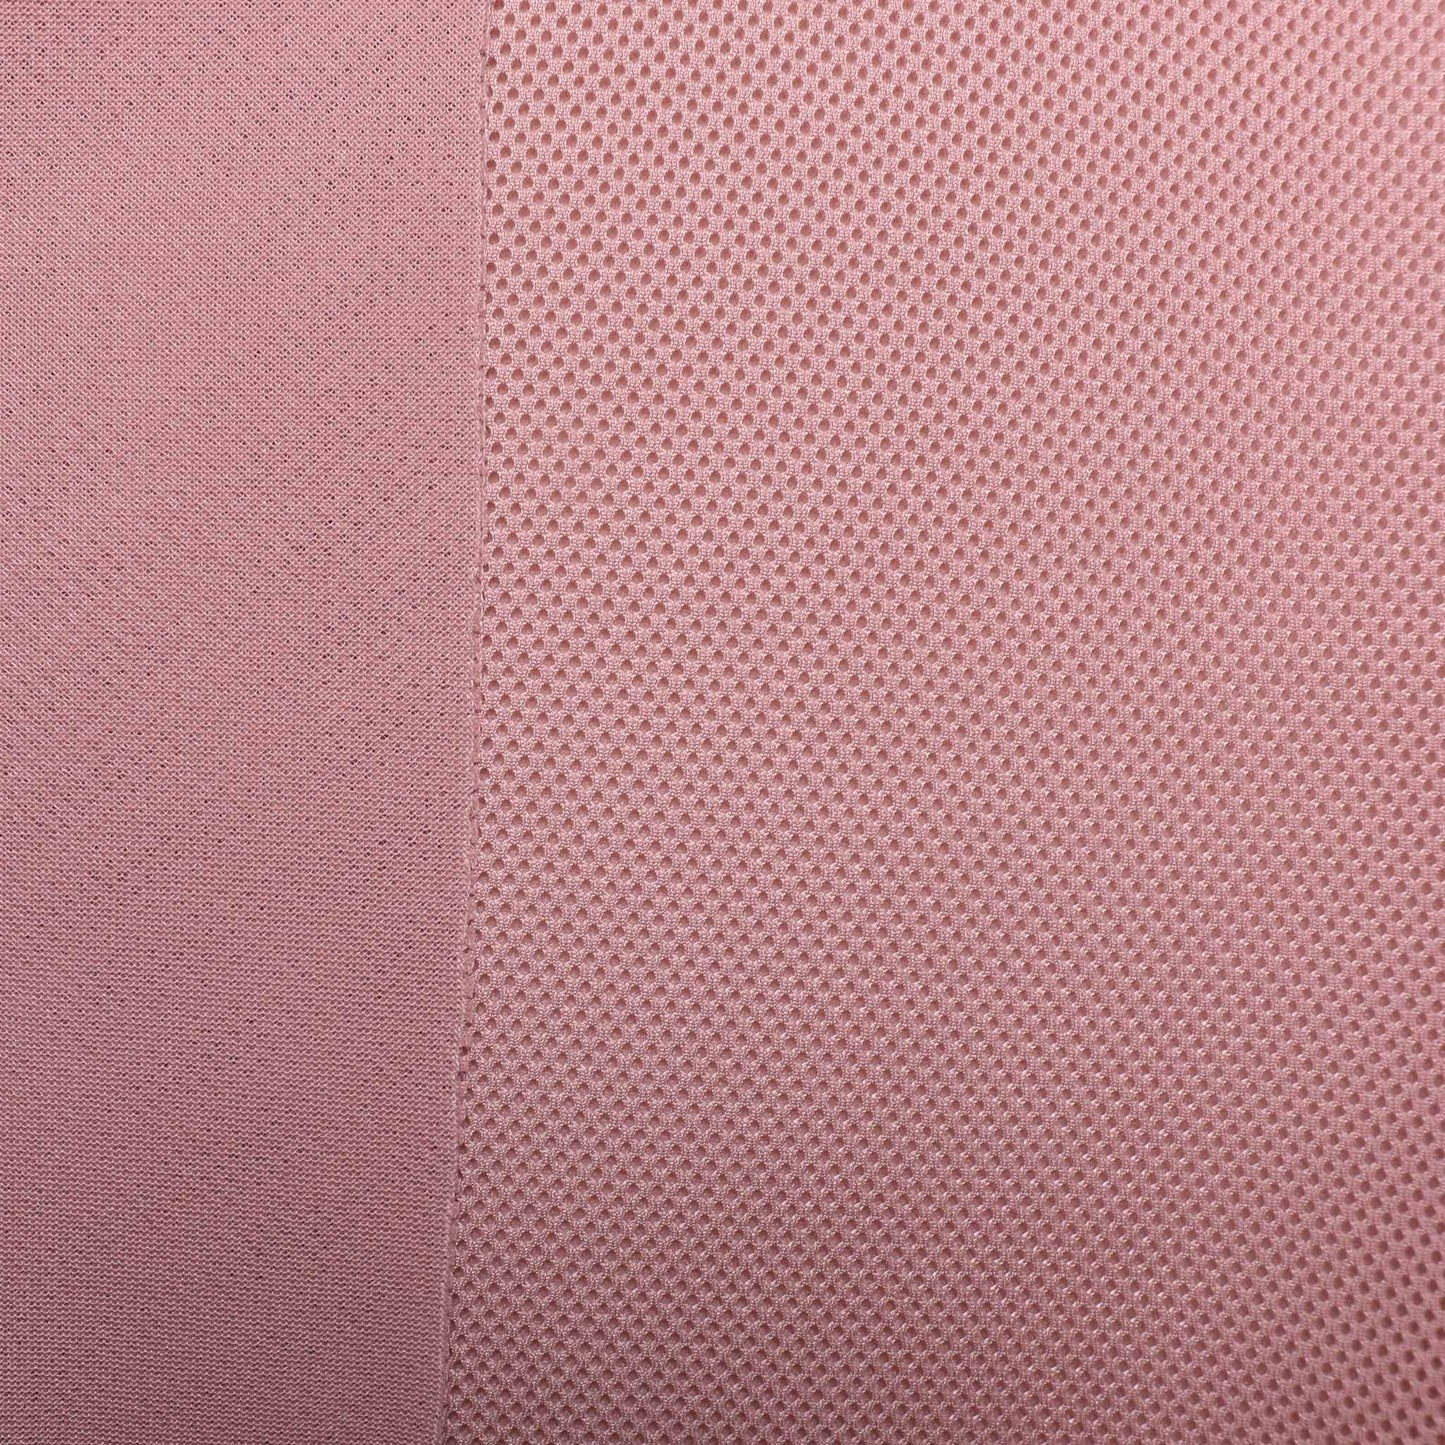 pink 3D spacer airtex mesh sports fabric for activity dressmaking